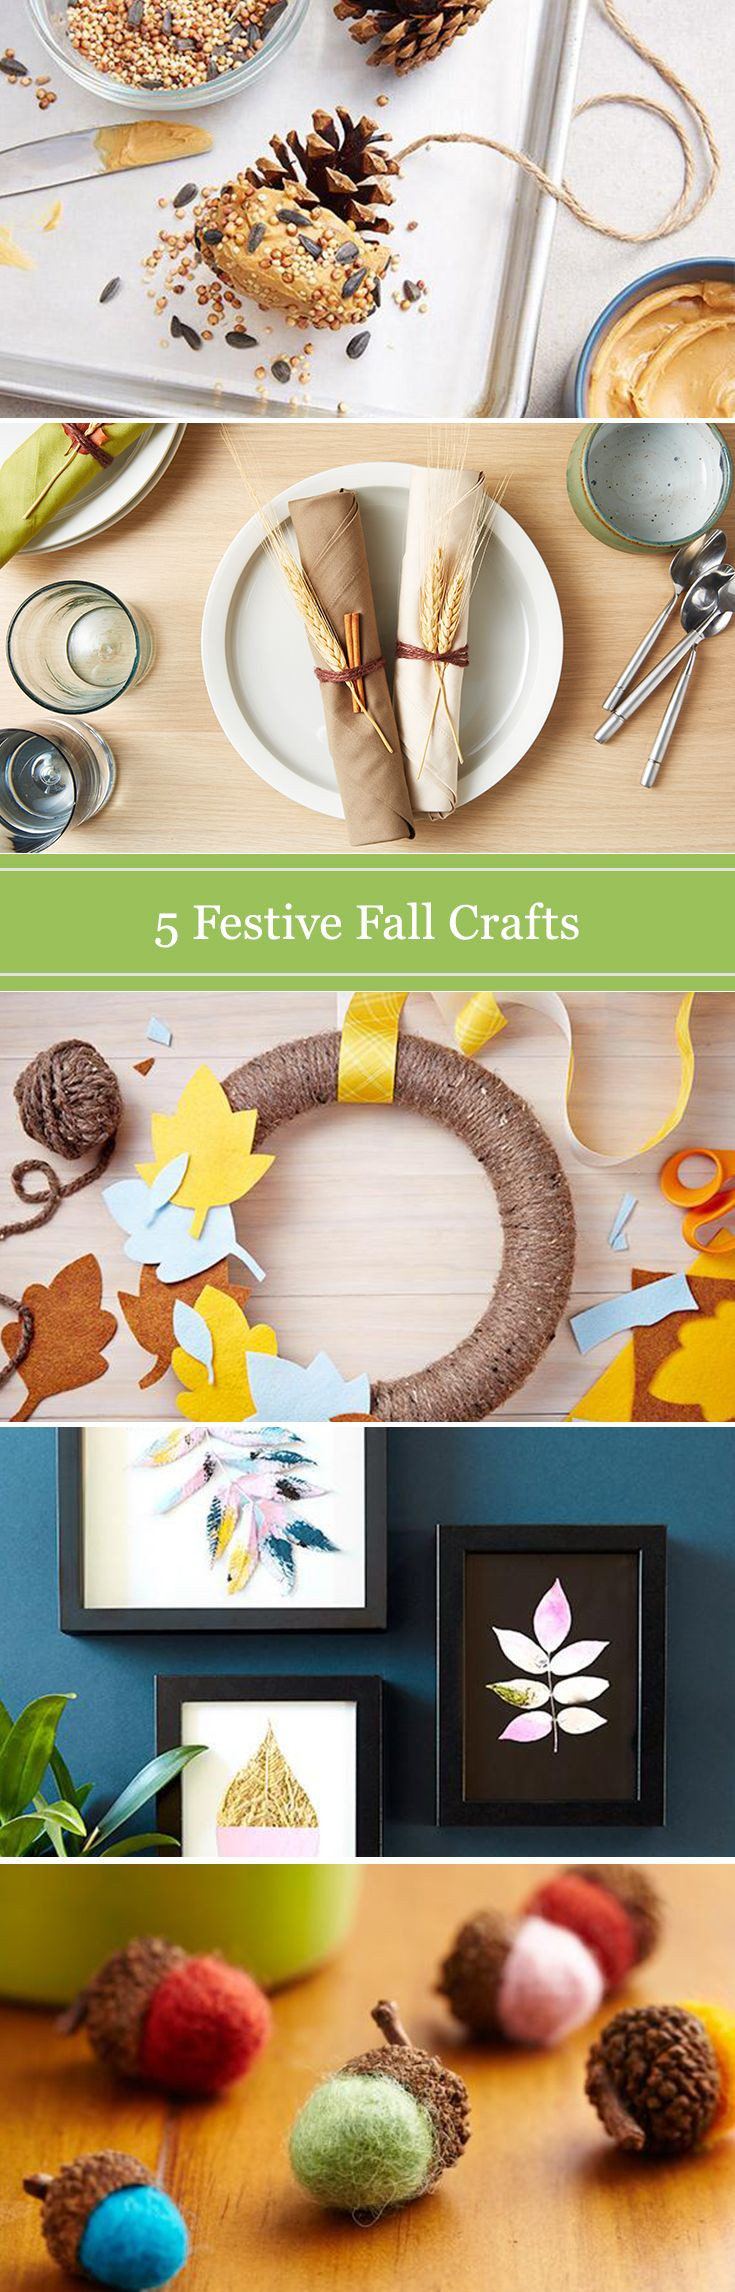 Fun Craft For Adults
 51 best Craft Ideas for Adults images on Pinterest